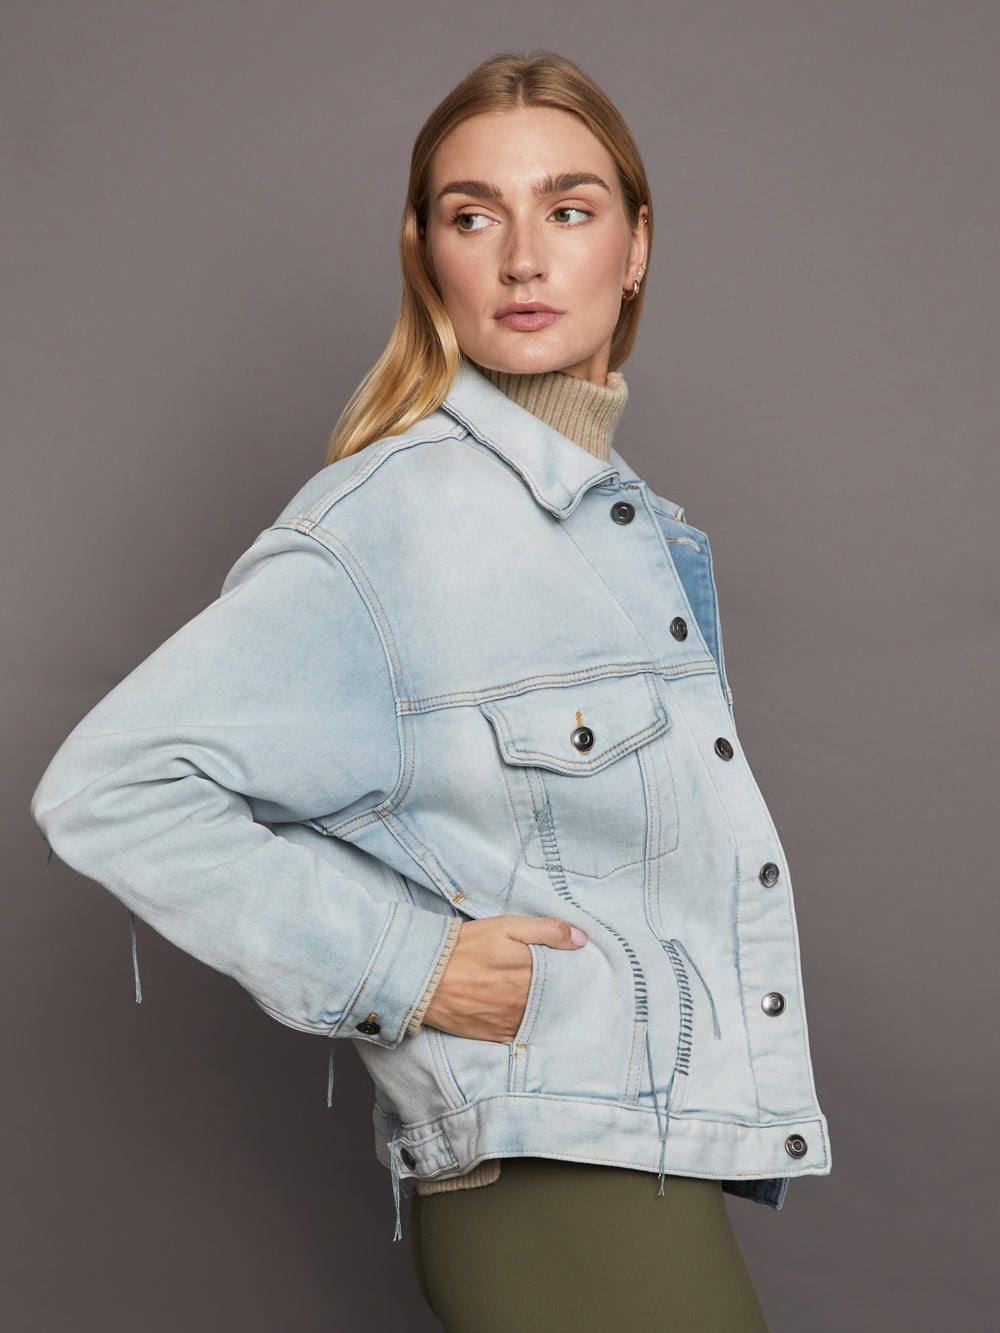 Shoppers Say This Perfect Oversized Denim Jacket Has So Much